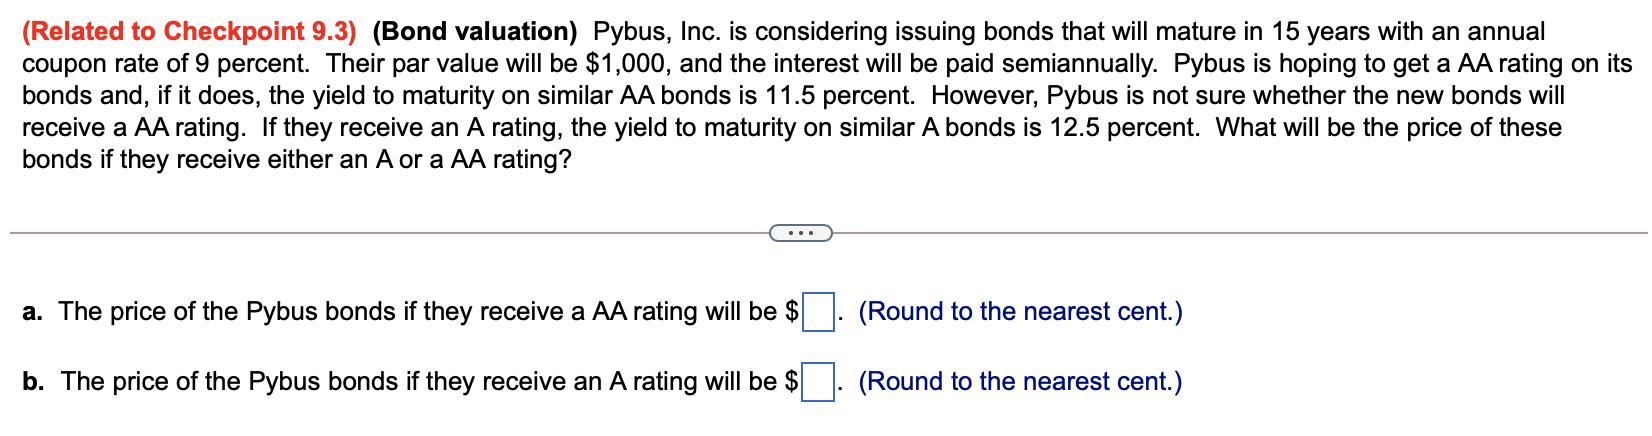 (Related to Checkpoint 9.3) (Bond valuation) Pybus, Inc. is considering issuing bonds that will mature in 15 years with an an